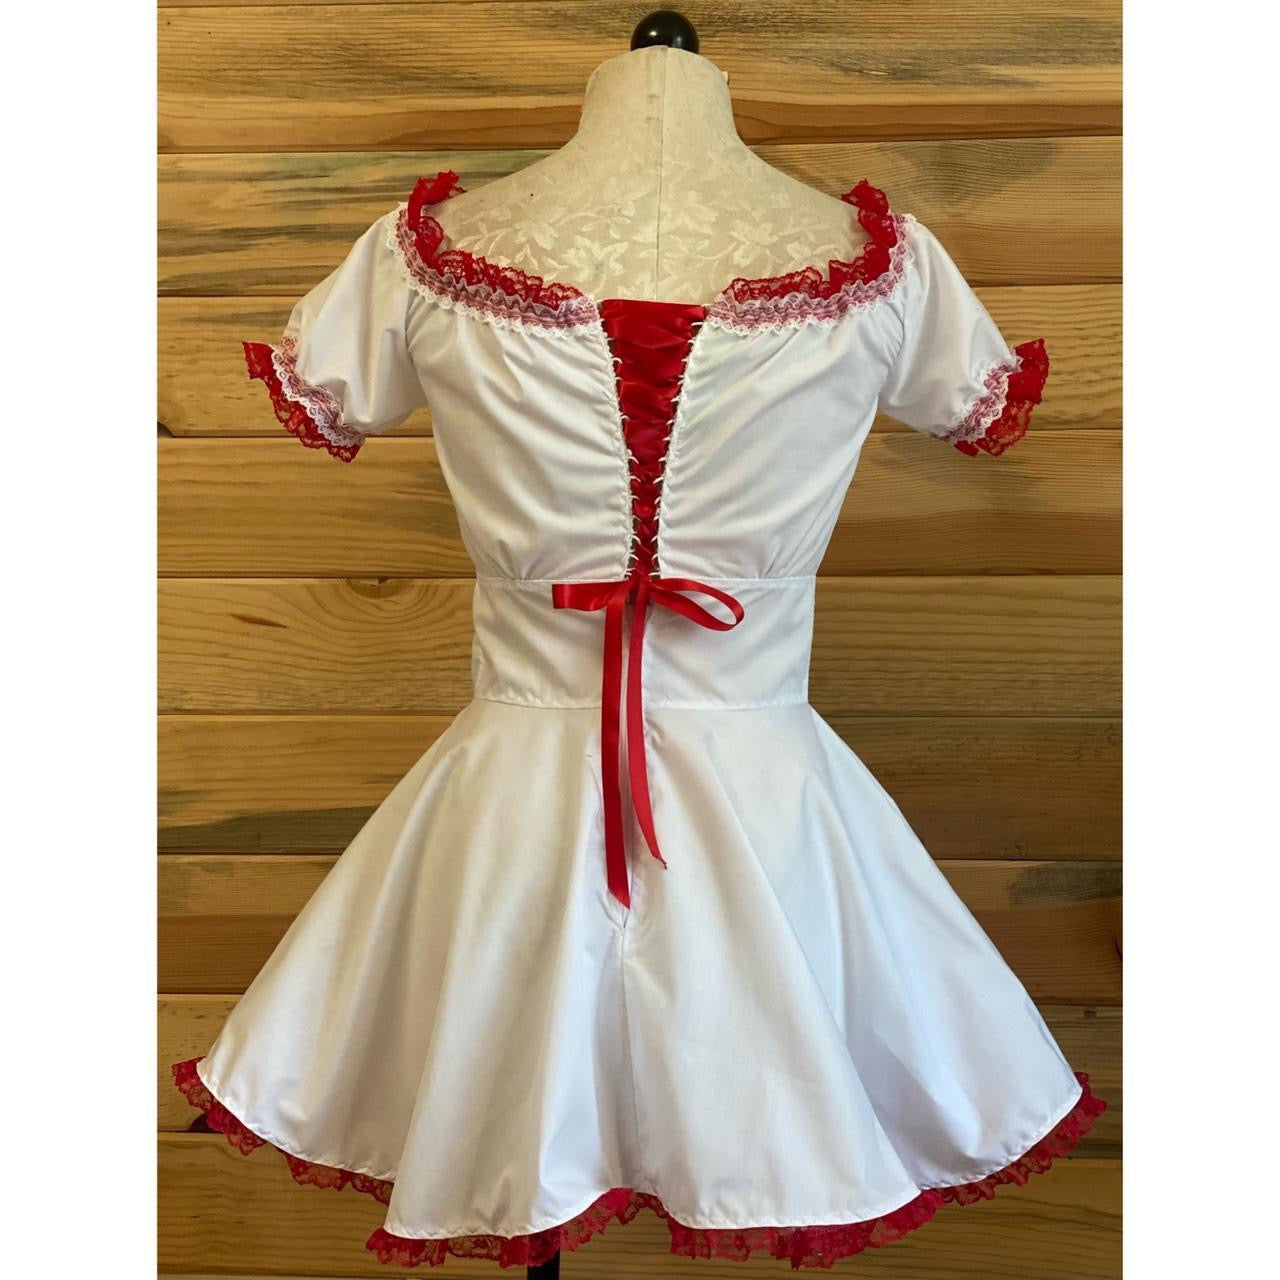 The Maja Dress in White and Red